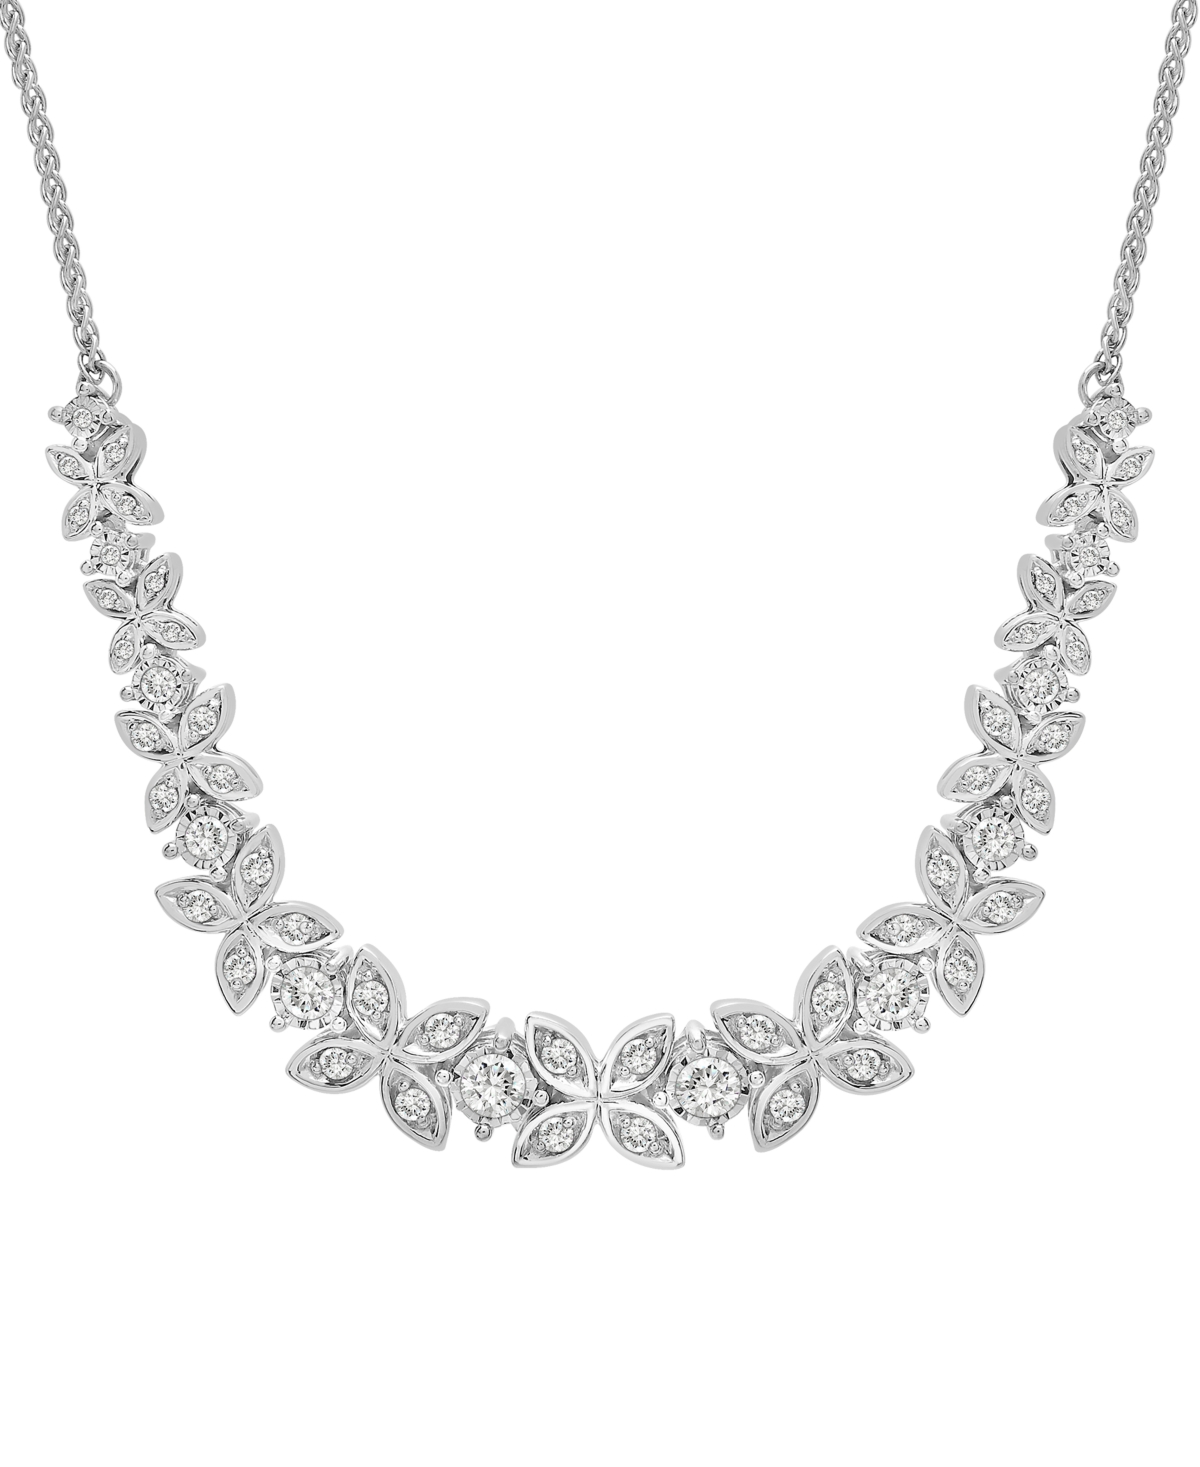 Diamond Butterfly Statement Necklace (1 ct. t.w.) in Sterling Silver, 16-1/2" + 2" extender, Created for Macy's - Sterling Silver